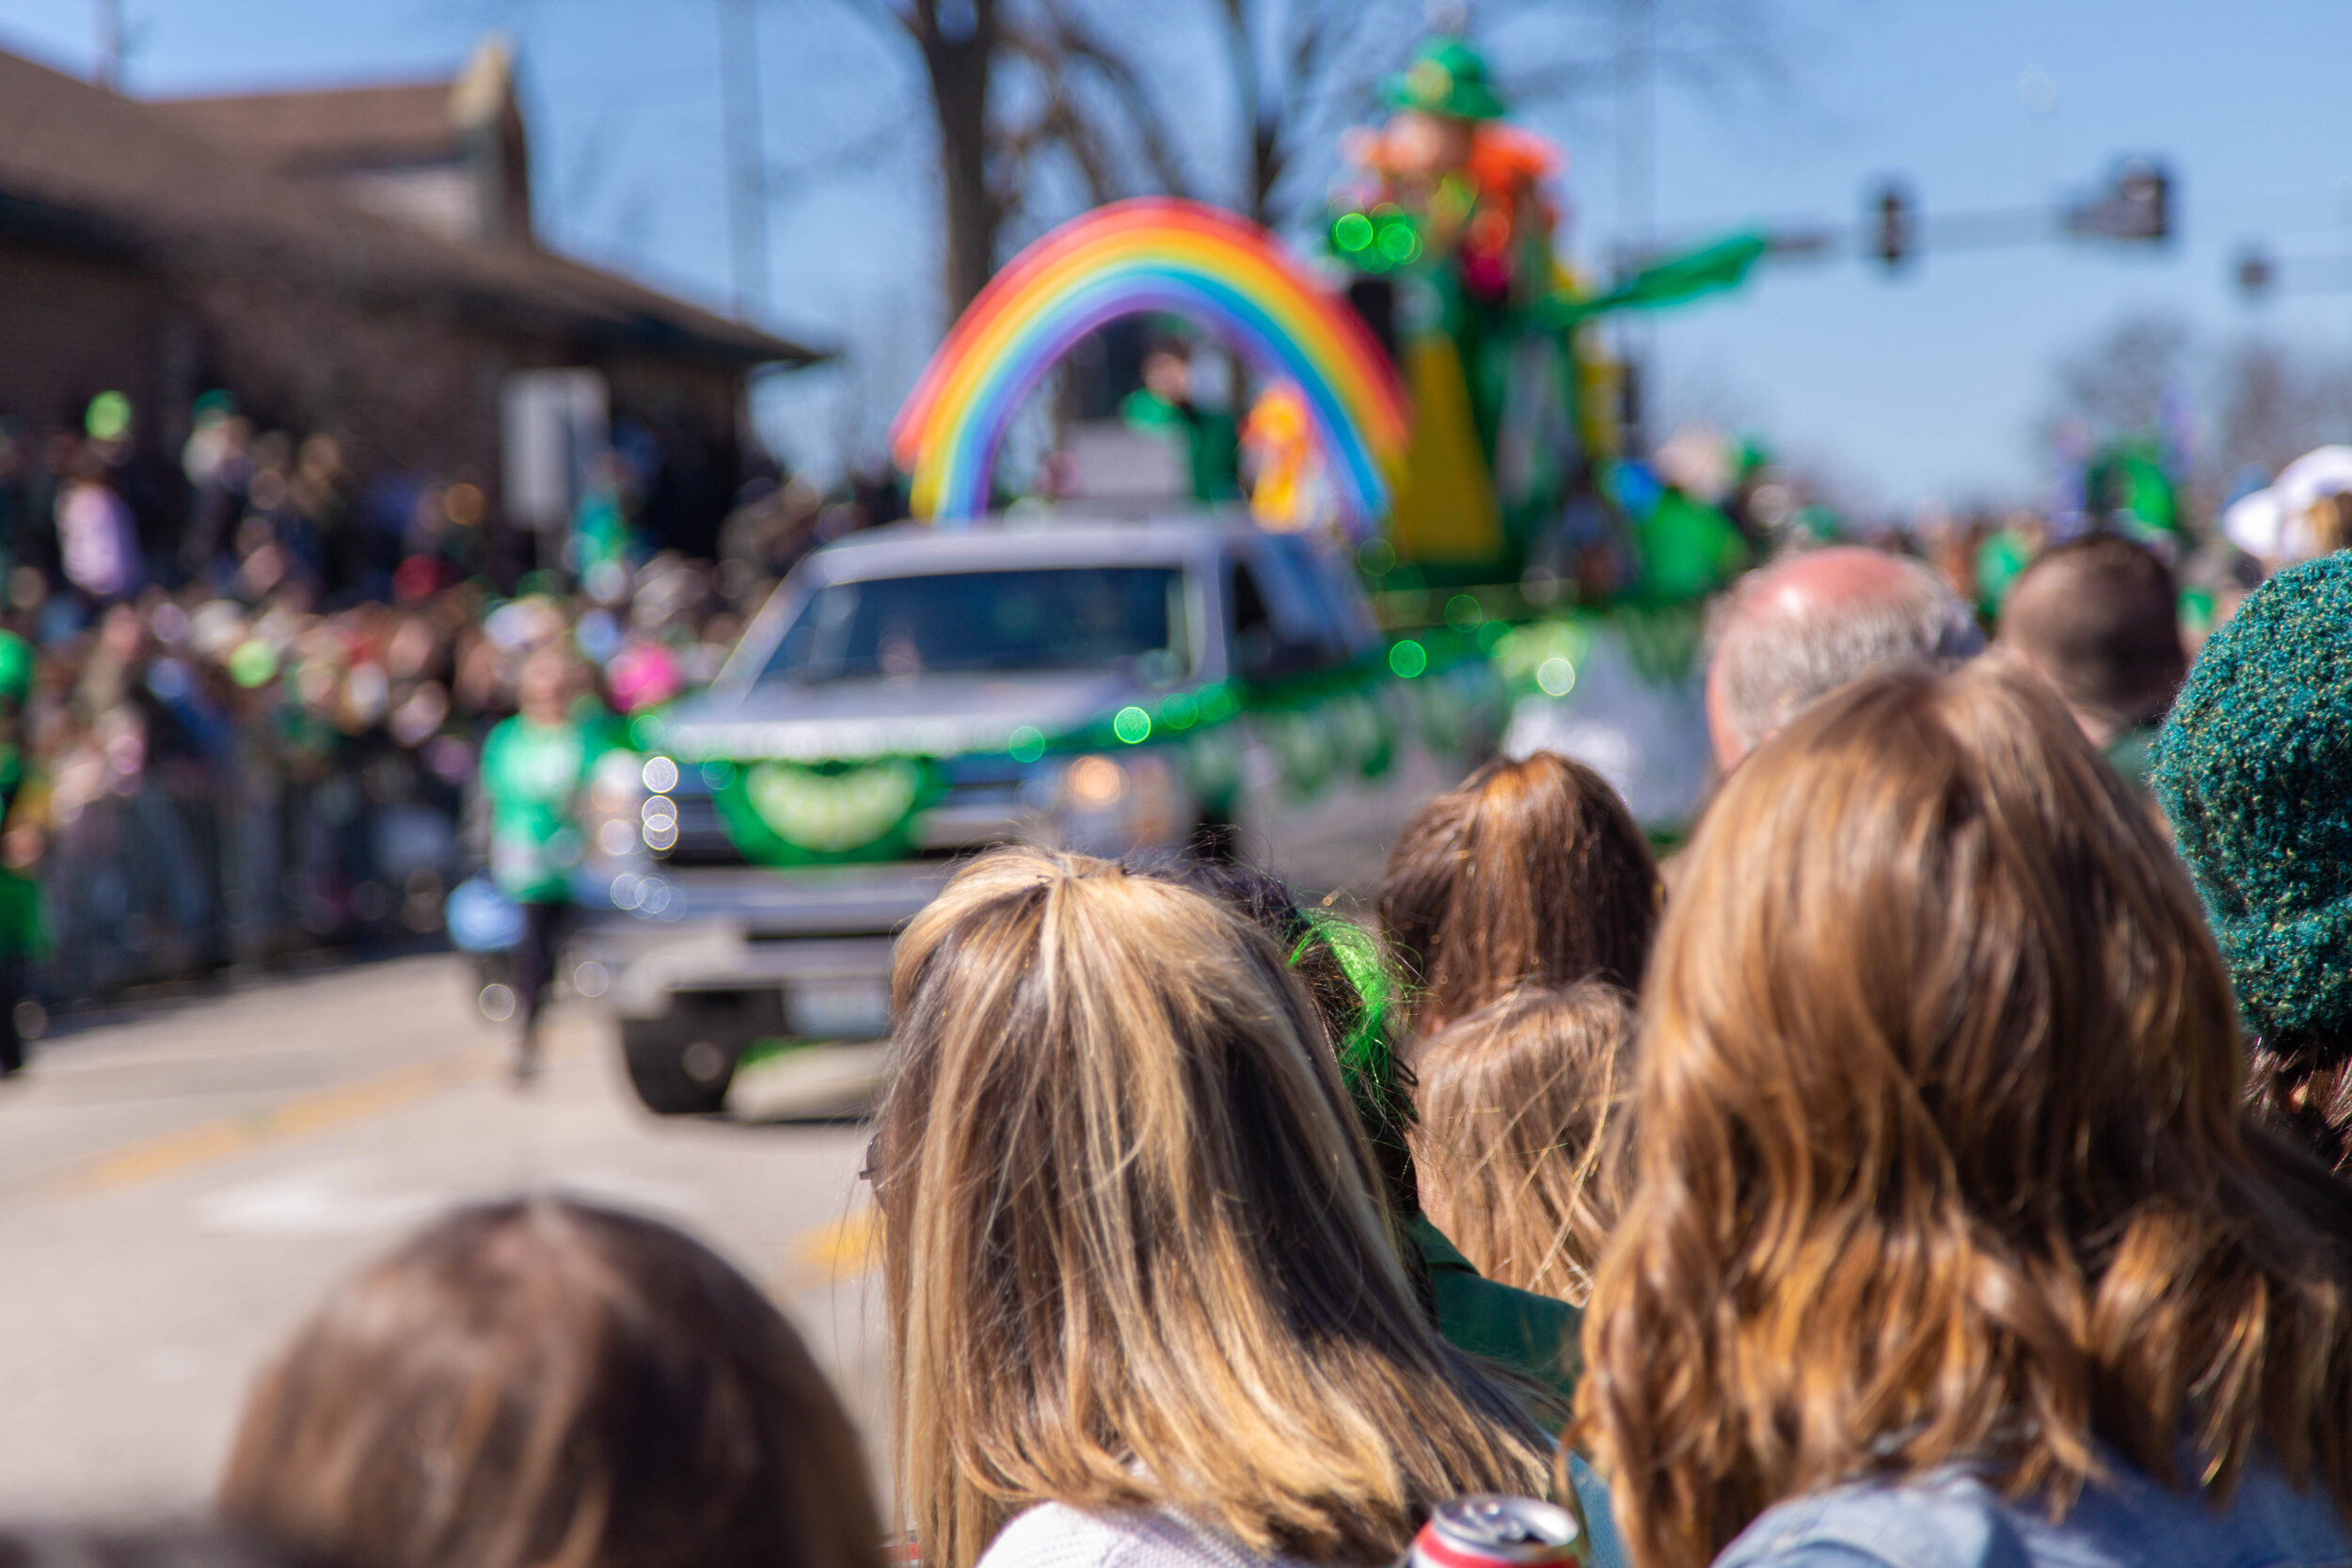 The Parade - Much to our disappointment, we will not be able to host the Shamrock Parade.